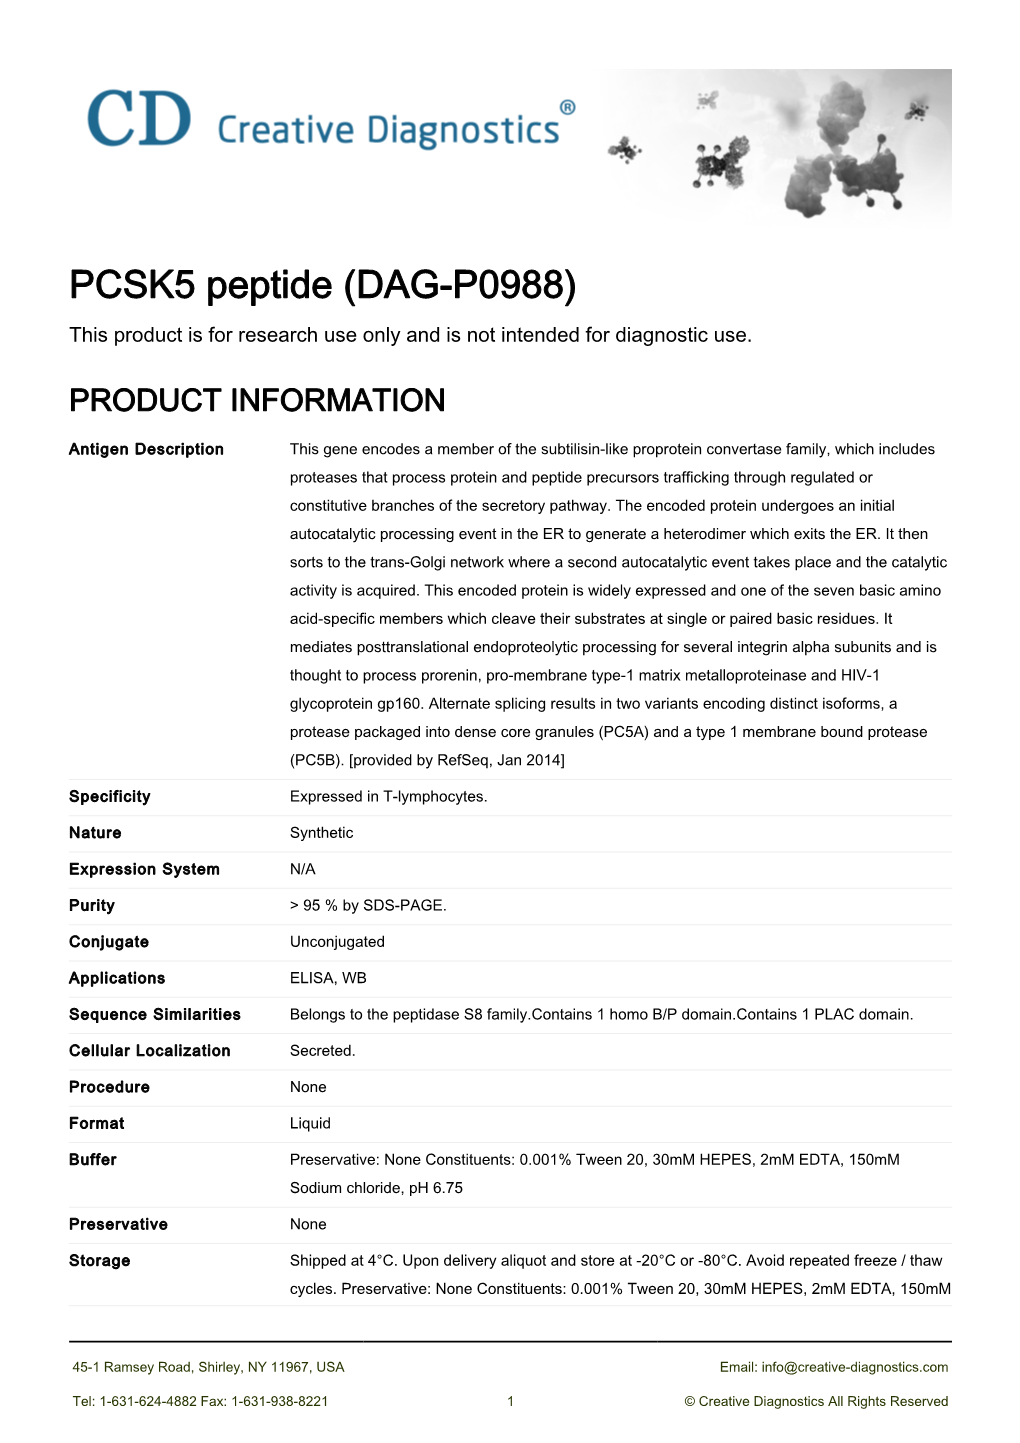 PCSK5 Peptide (DAG-P0988) This Product Is for Research Use Only and Is Not Intended for Diagnostic Use